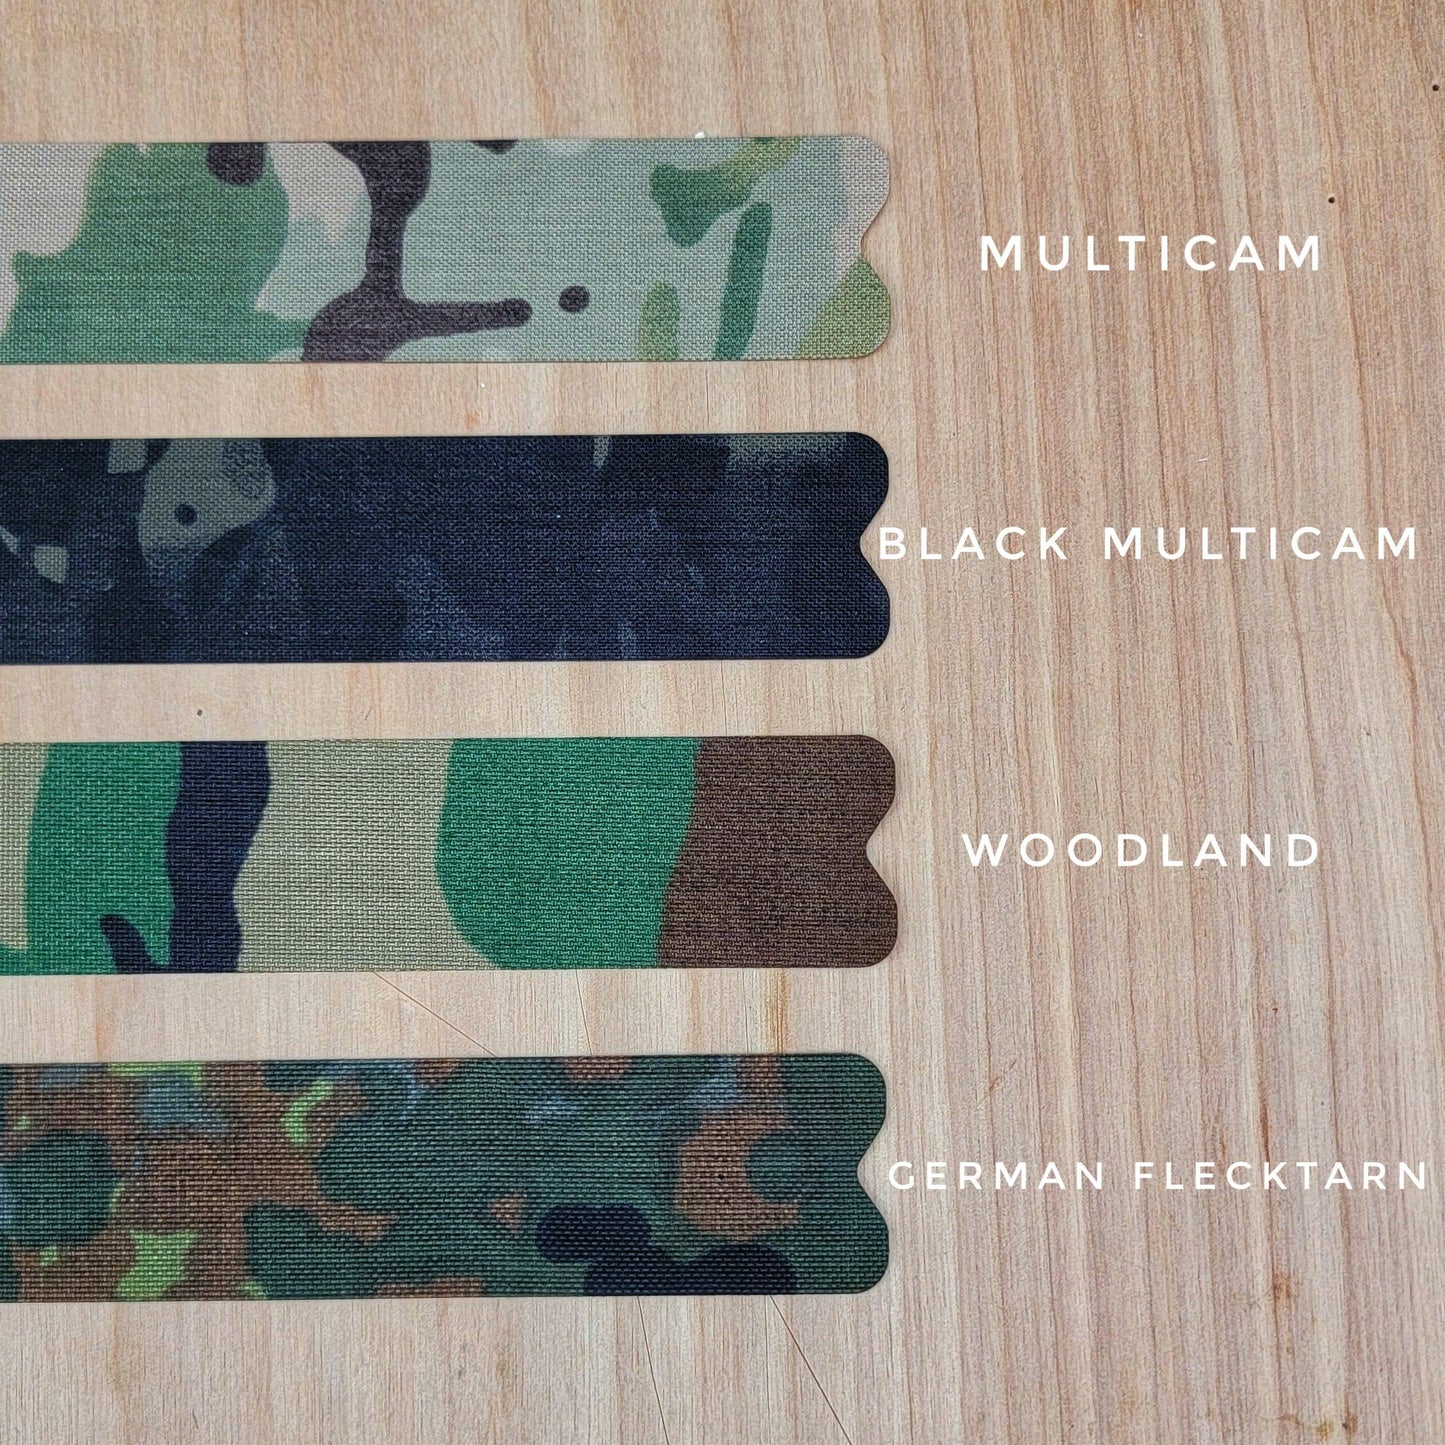 Tact-Wrap airsoft stickers, Cordura cheek rest for Magpul ACS stock, tactical, camo, multicam, holster wrap, decal